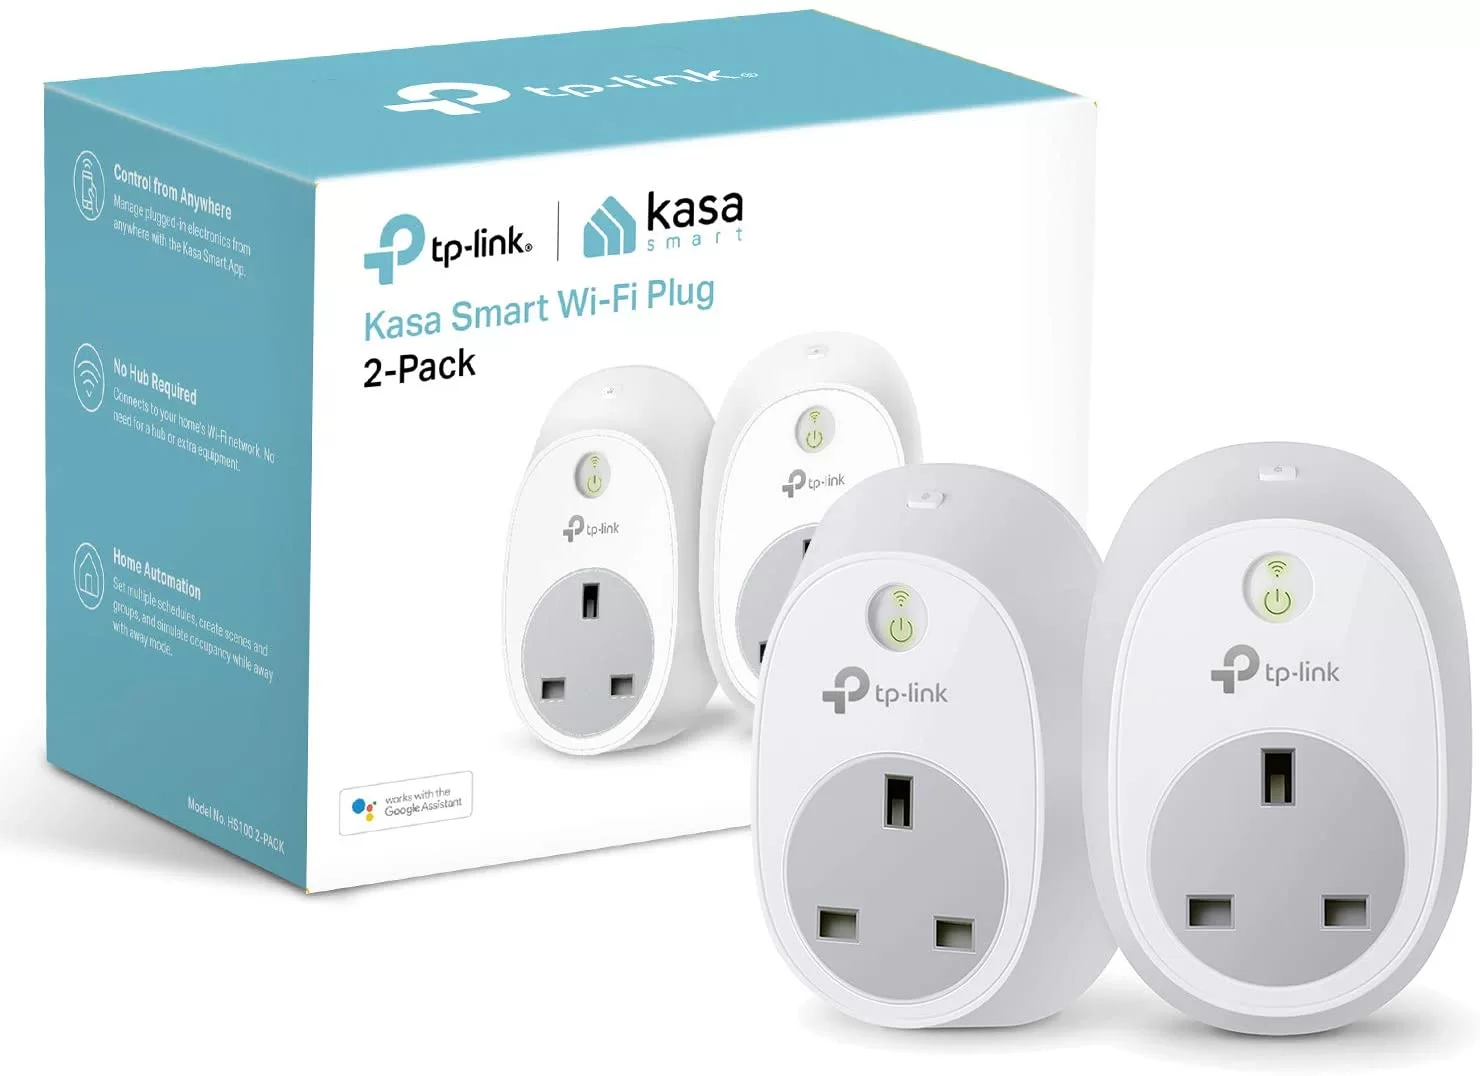 How To Connect Bn Link Smart Plug